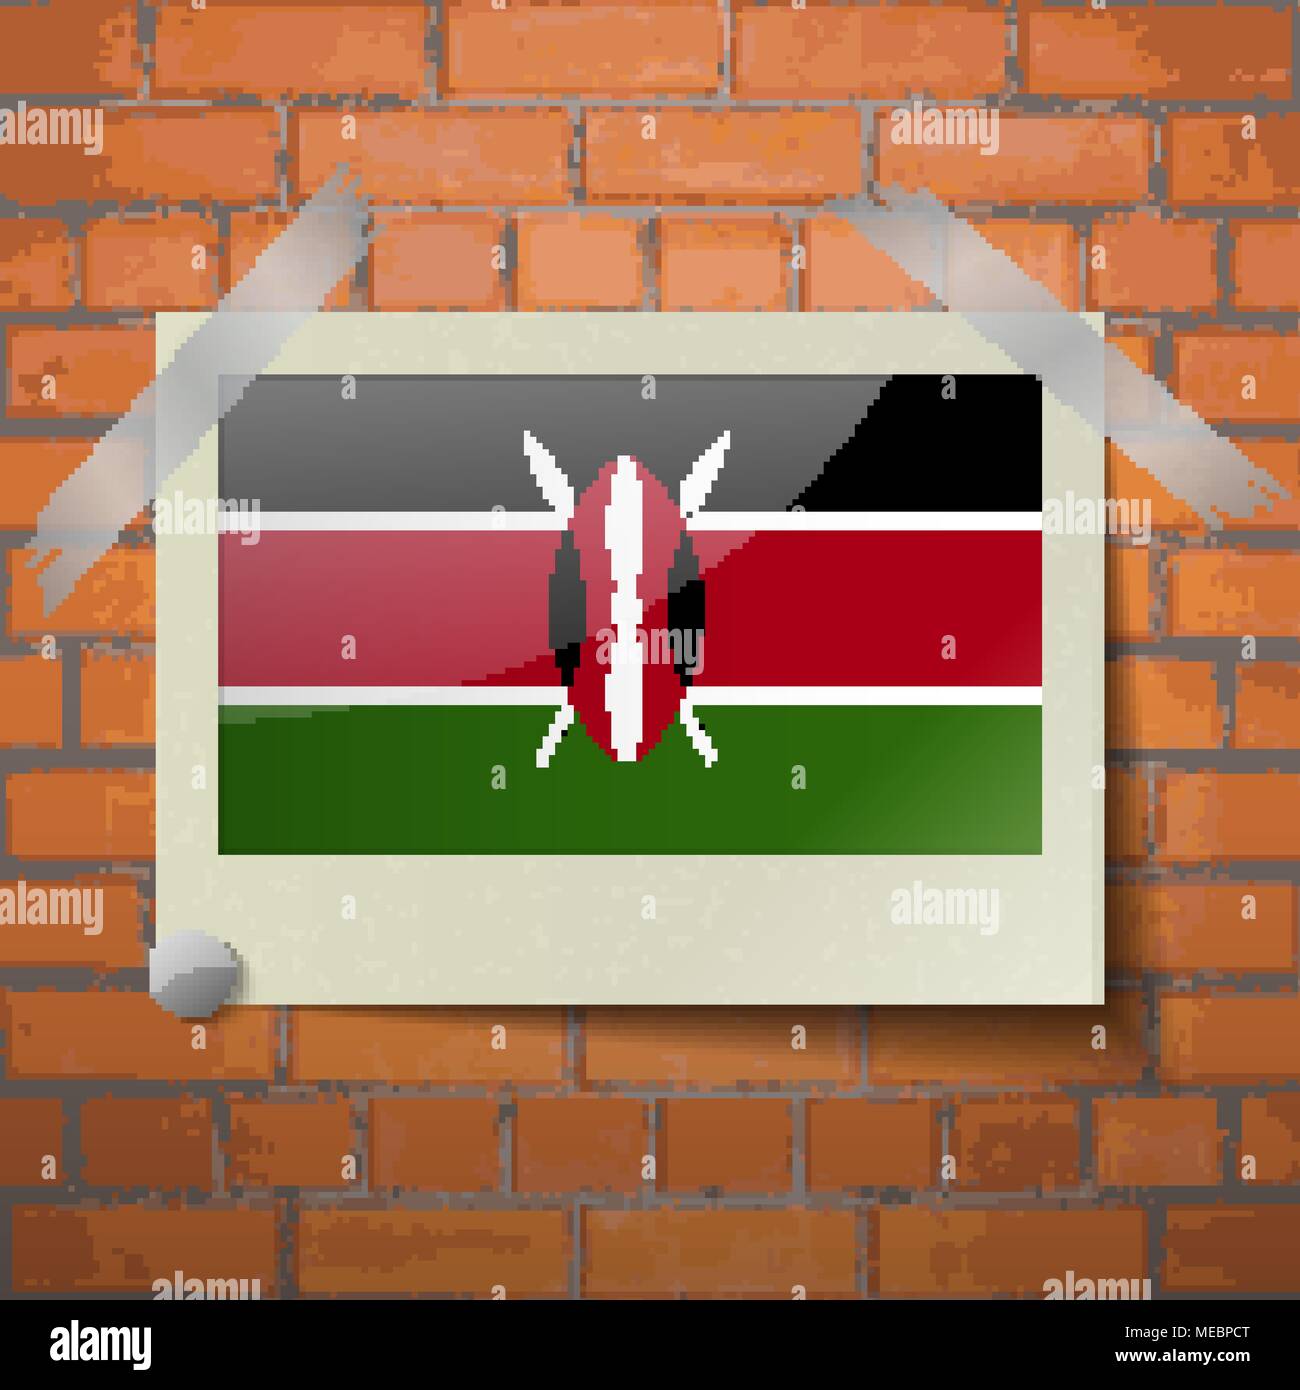 Flags of Kenya scotch taped to a red brick wall. Vector Stock Vector